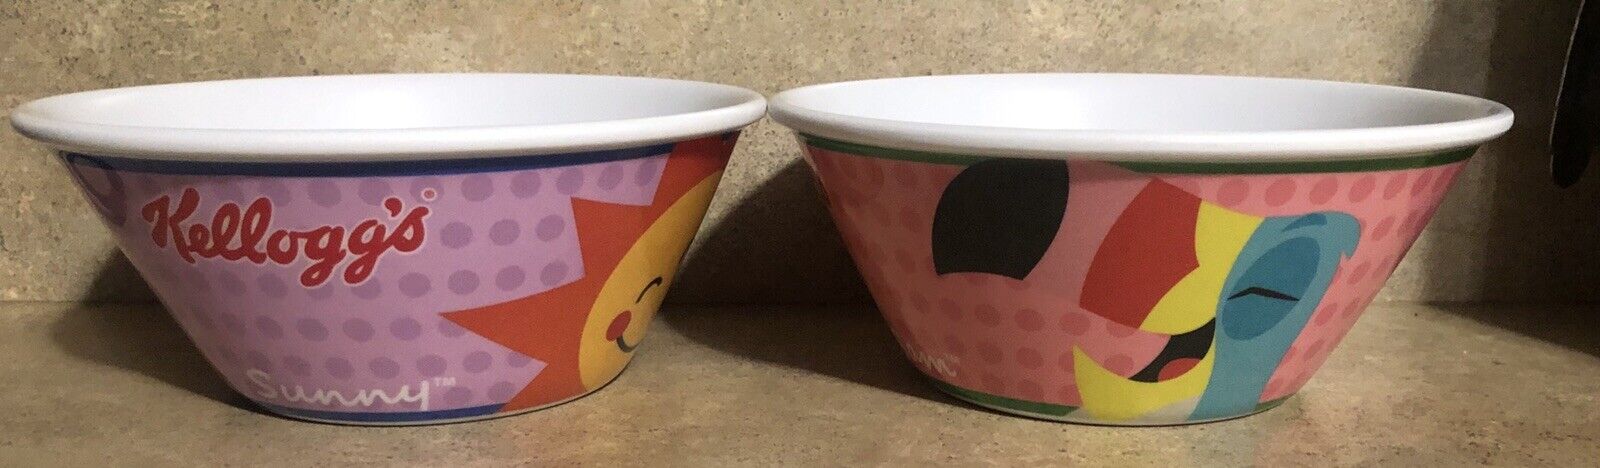 Kelloggs Cereal Bowls Lot Of 2 Brand New Vintage 2015